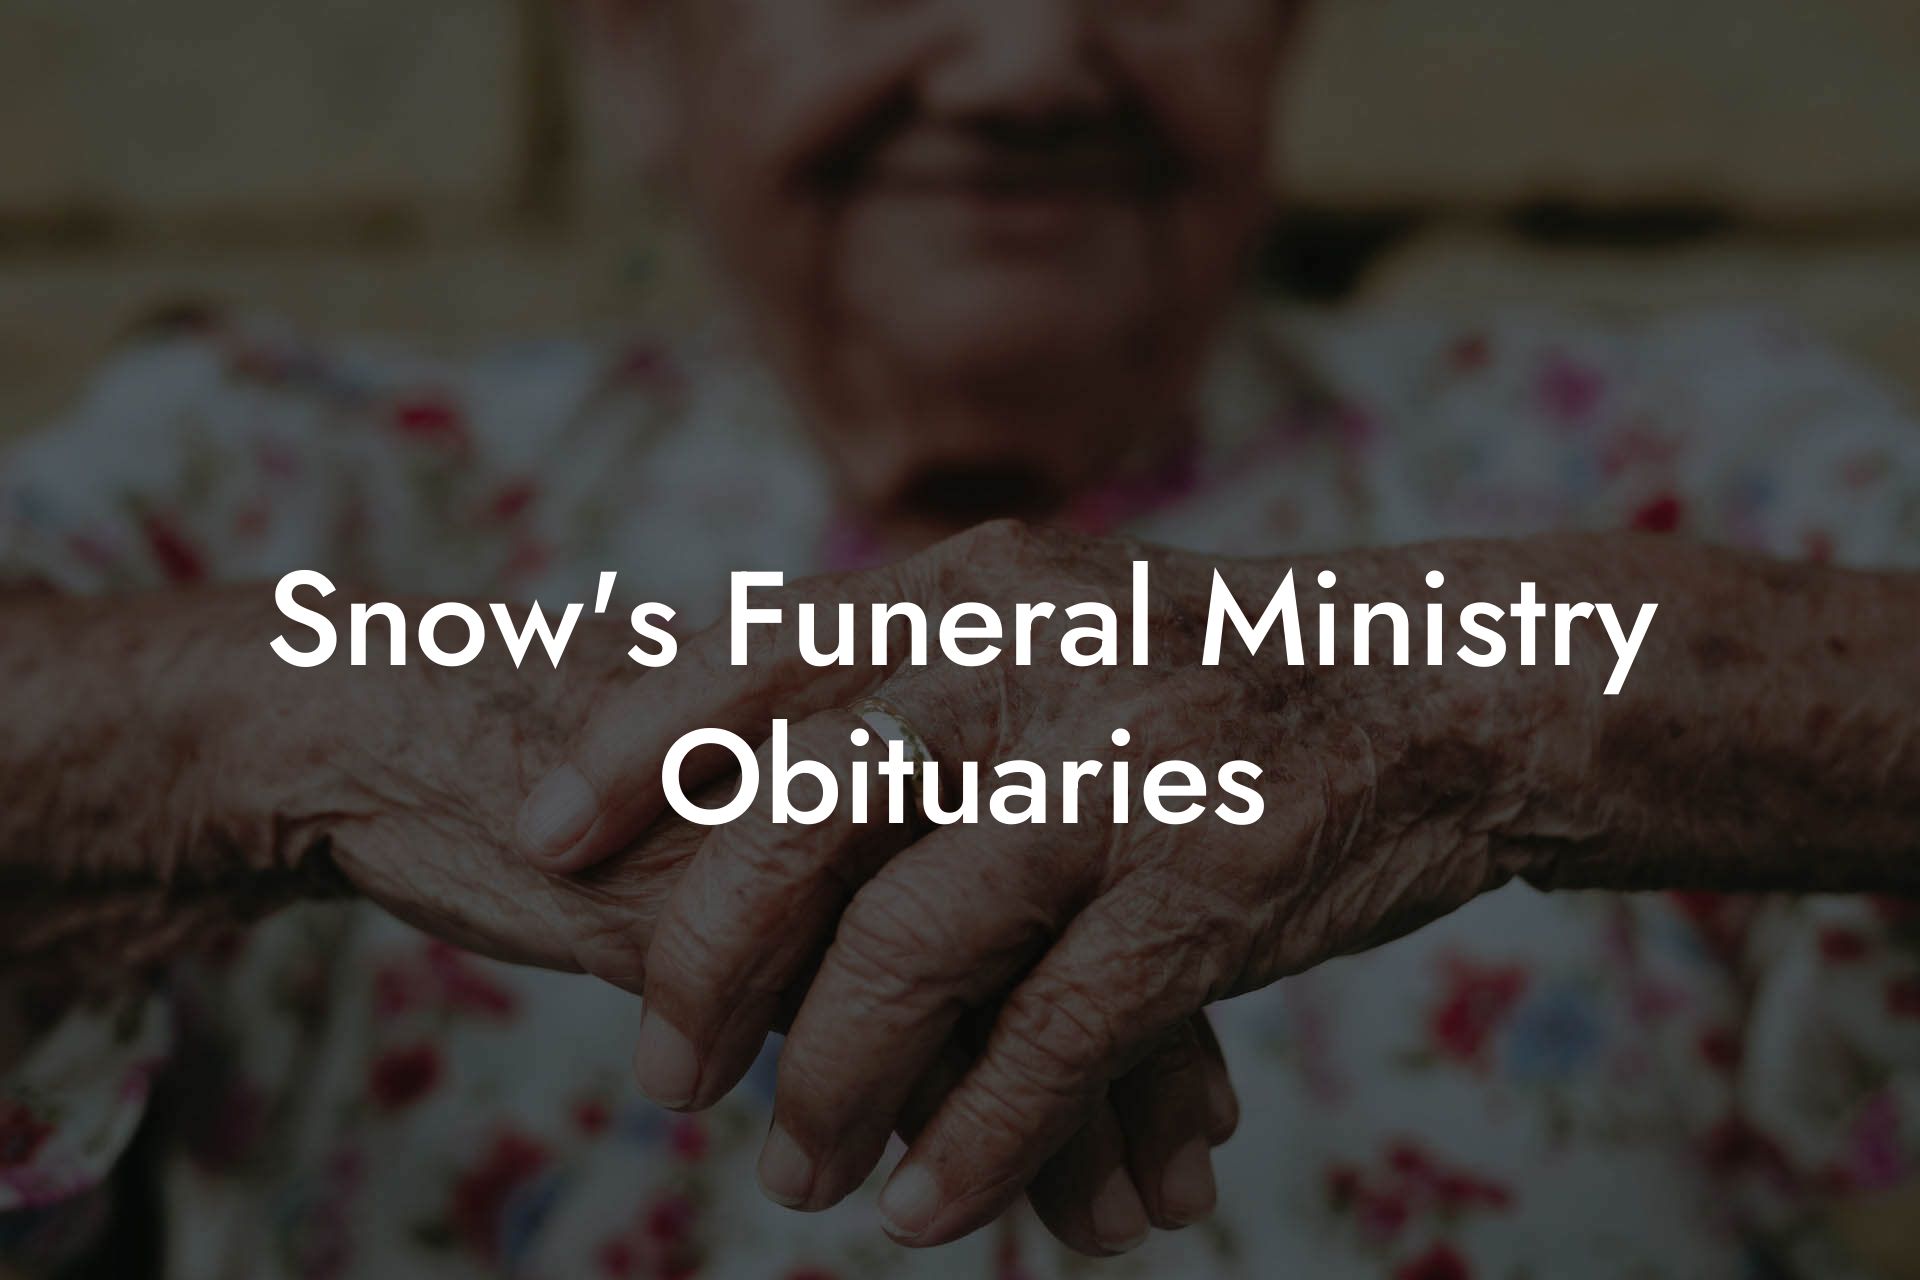 Snow's Funeral Ministry Obituaries